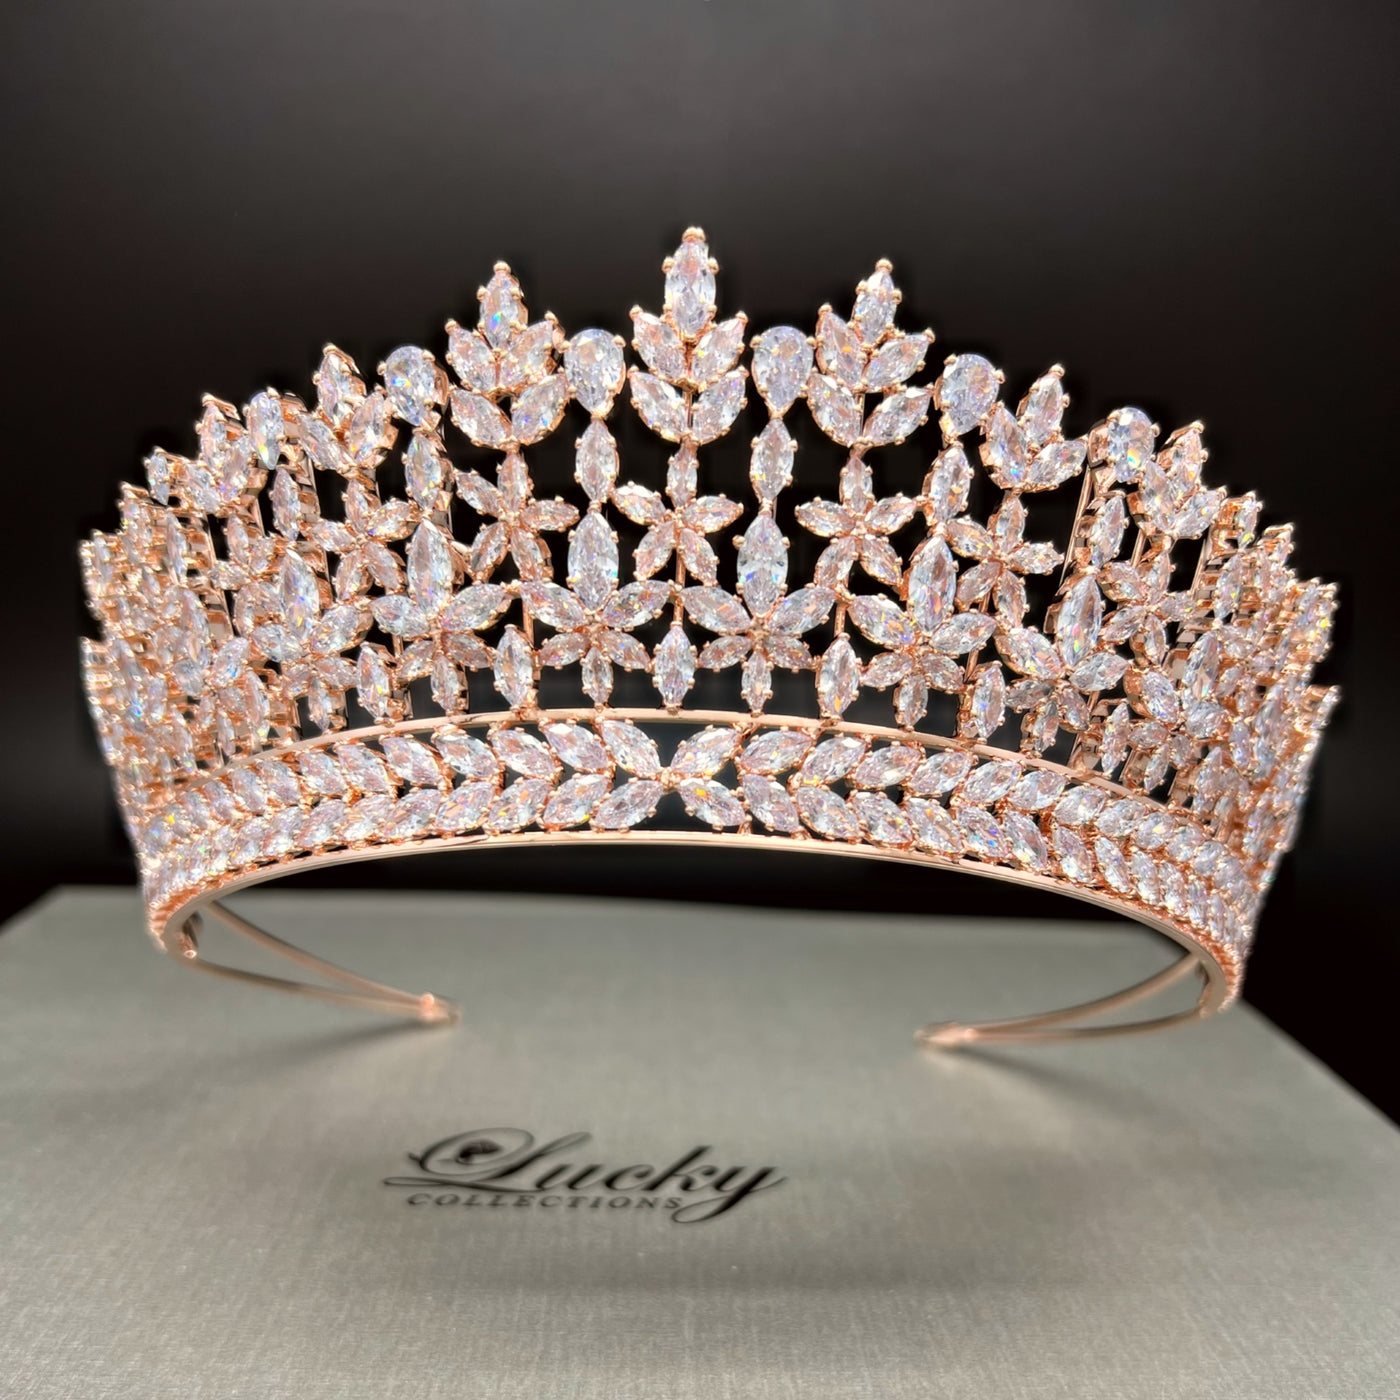 Tiara, Zirconia, CZ of Highest Grade in Silver, Gold & Rosegold by Lucky Collections ™